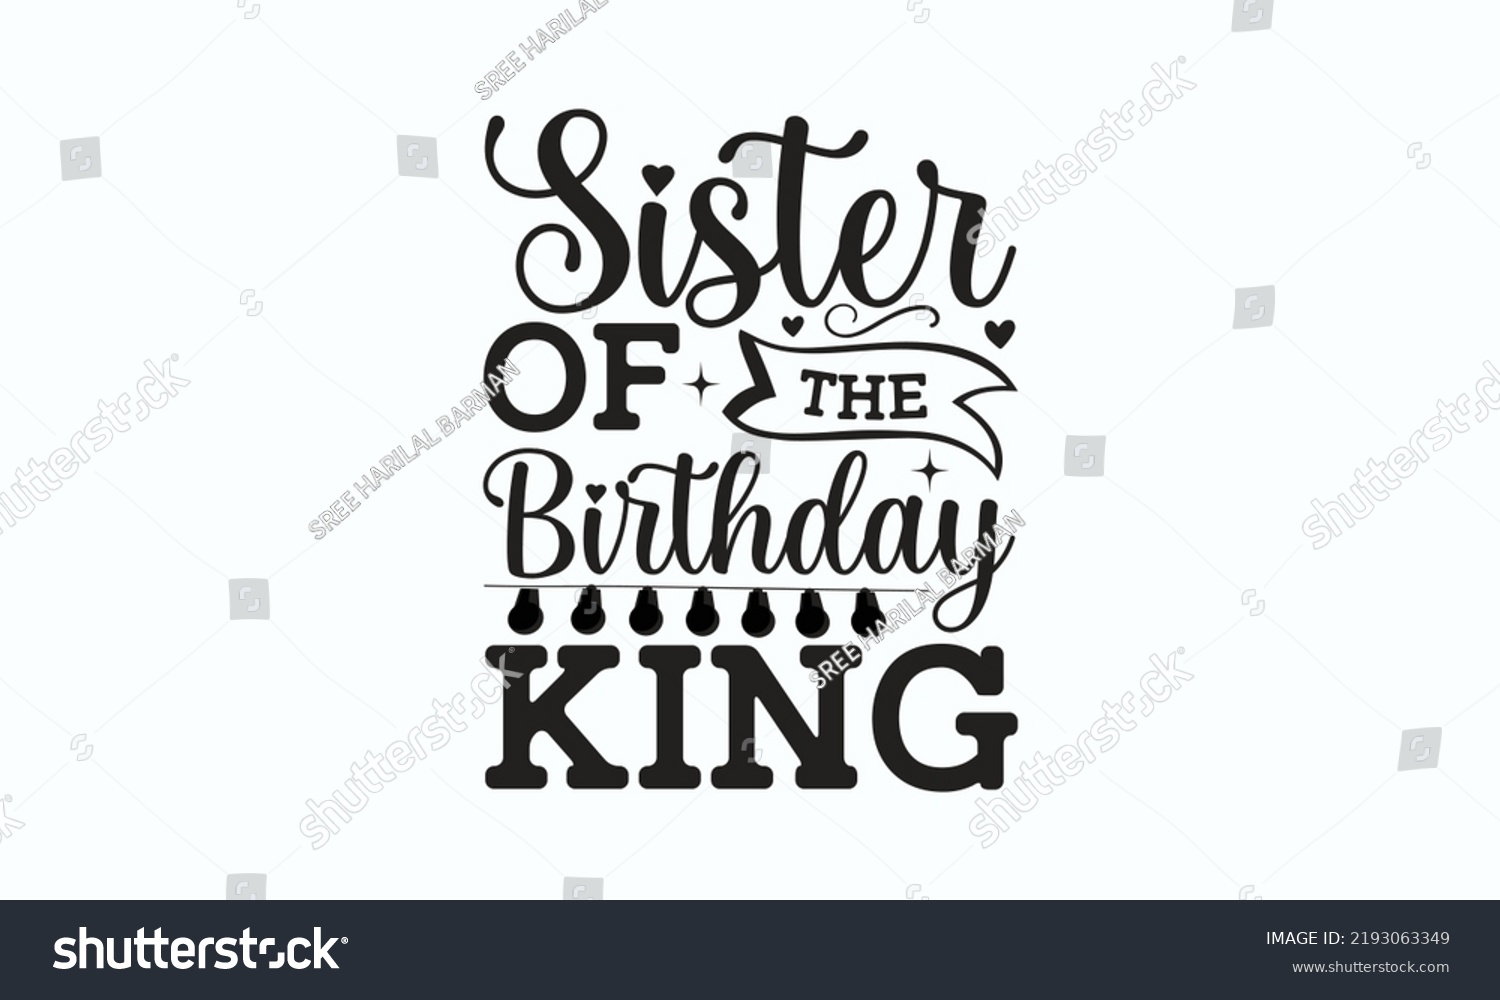 SVG of Sister of the birthday king - Birthday SVG Digest typographic vector design for greeting cards, Birthday cards, Good for scrapbooking, posters, templet, textiles, gifts, and wedding sets, design.  svg